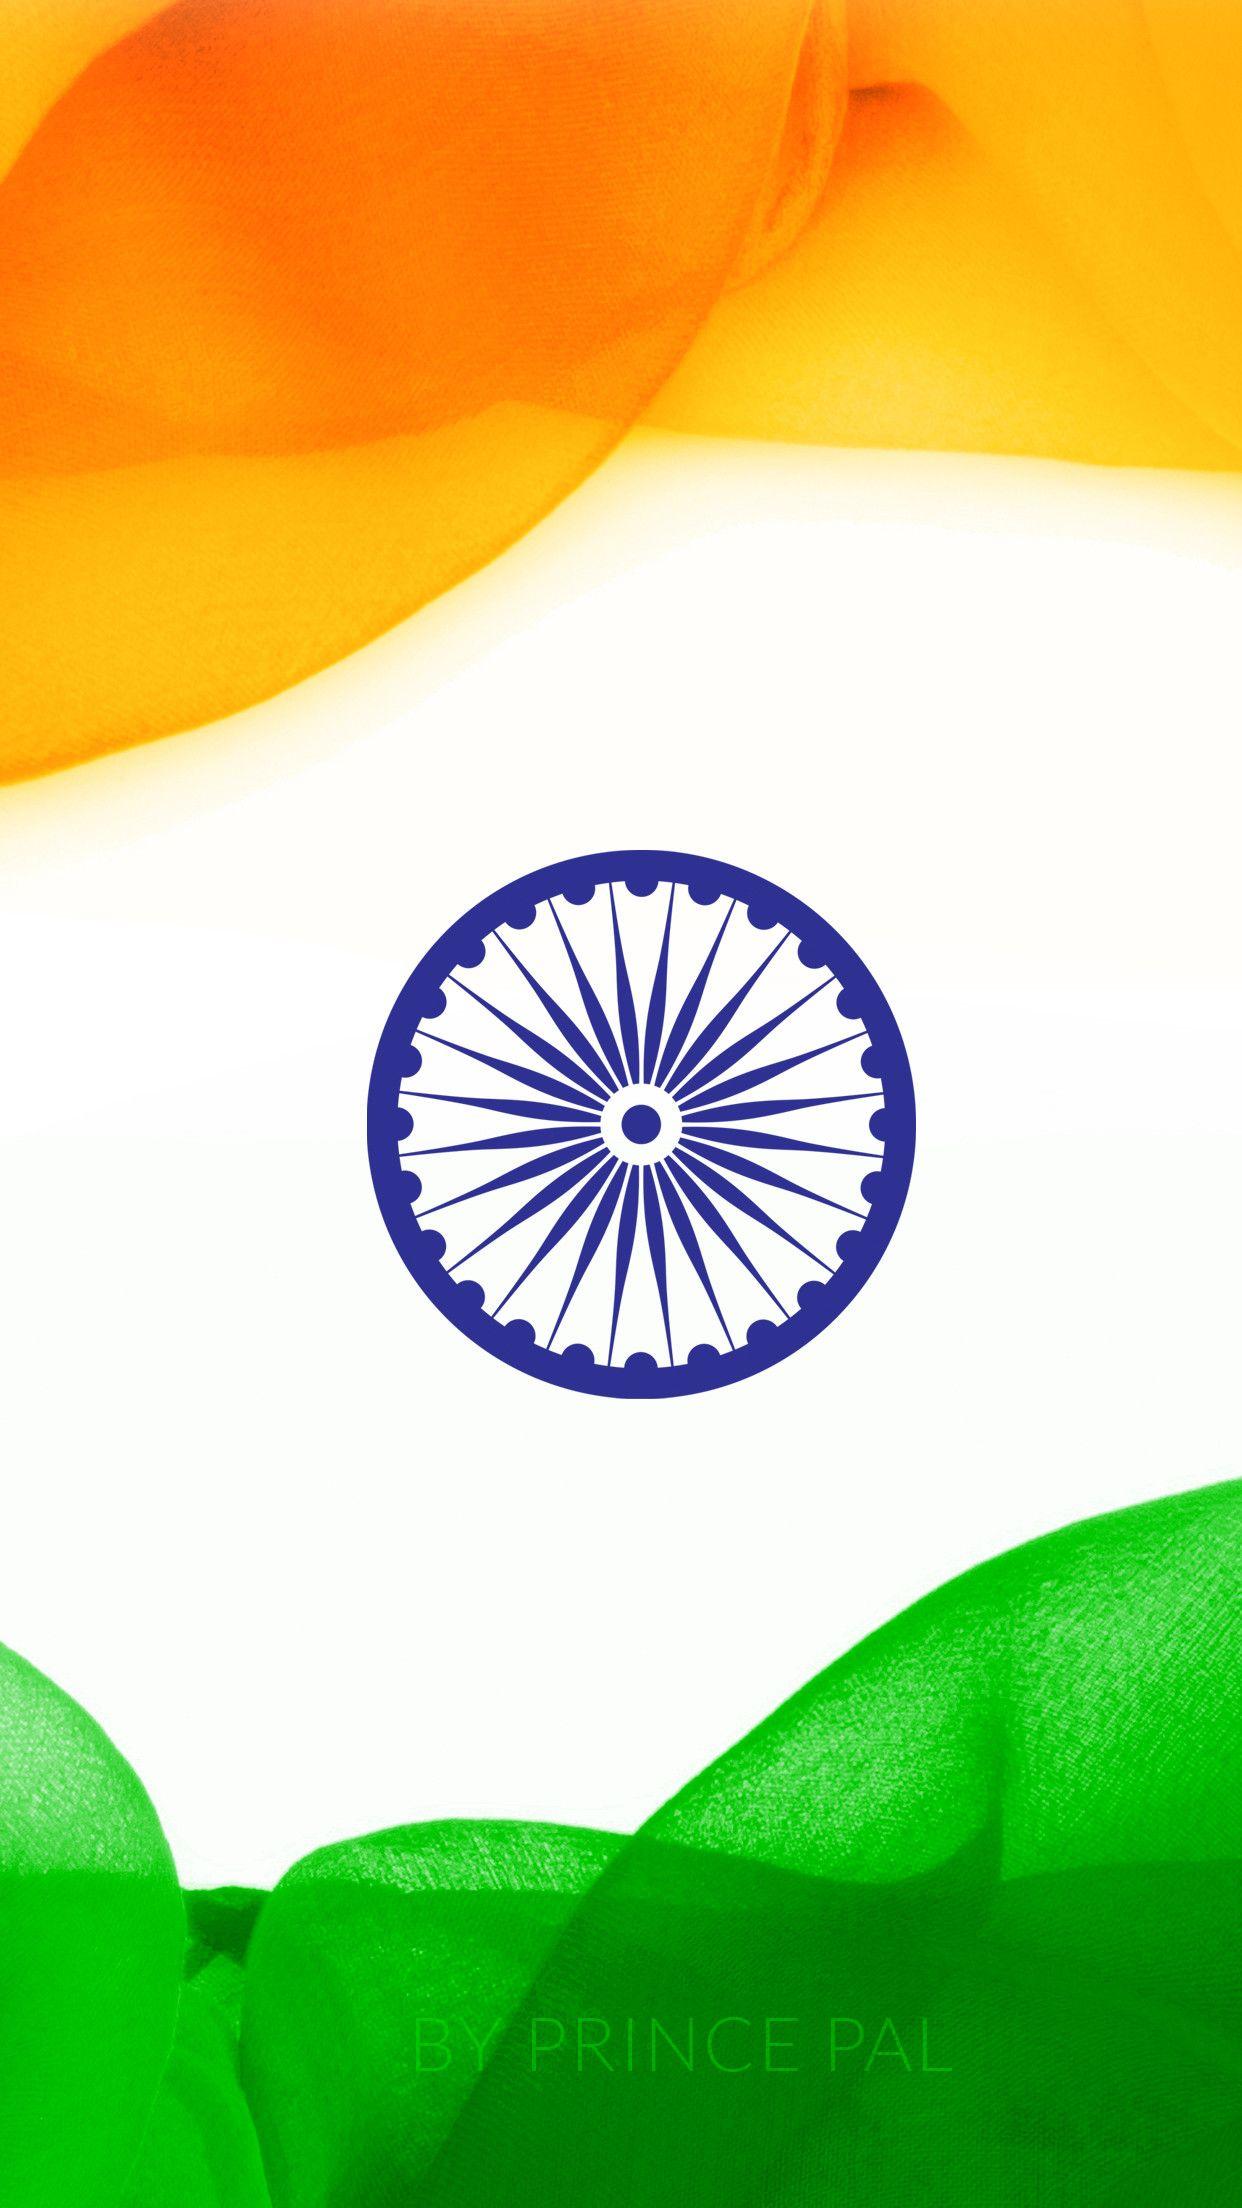 Indian Flag Hd 1080p Mobile Wallpapers - Wallpaper Cave